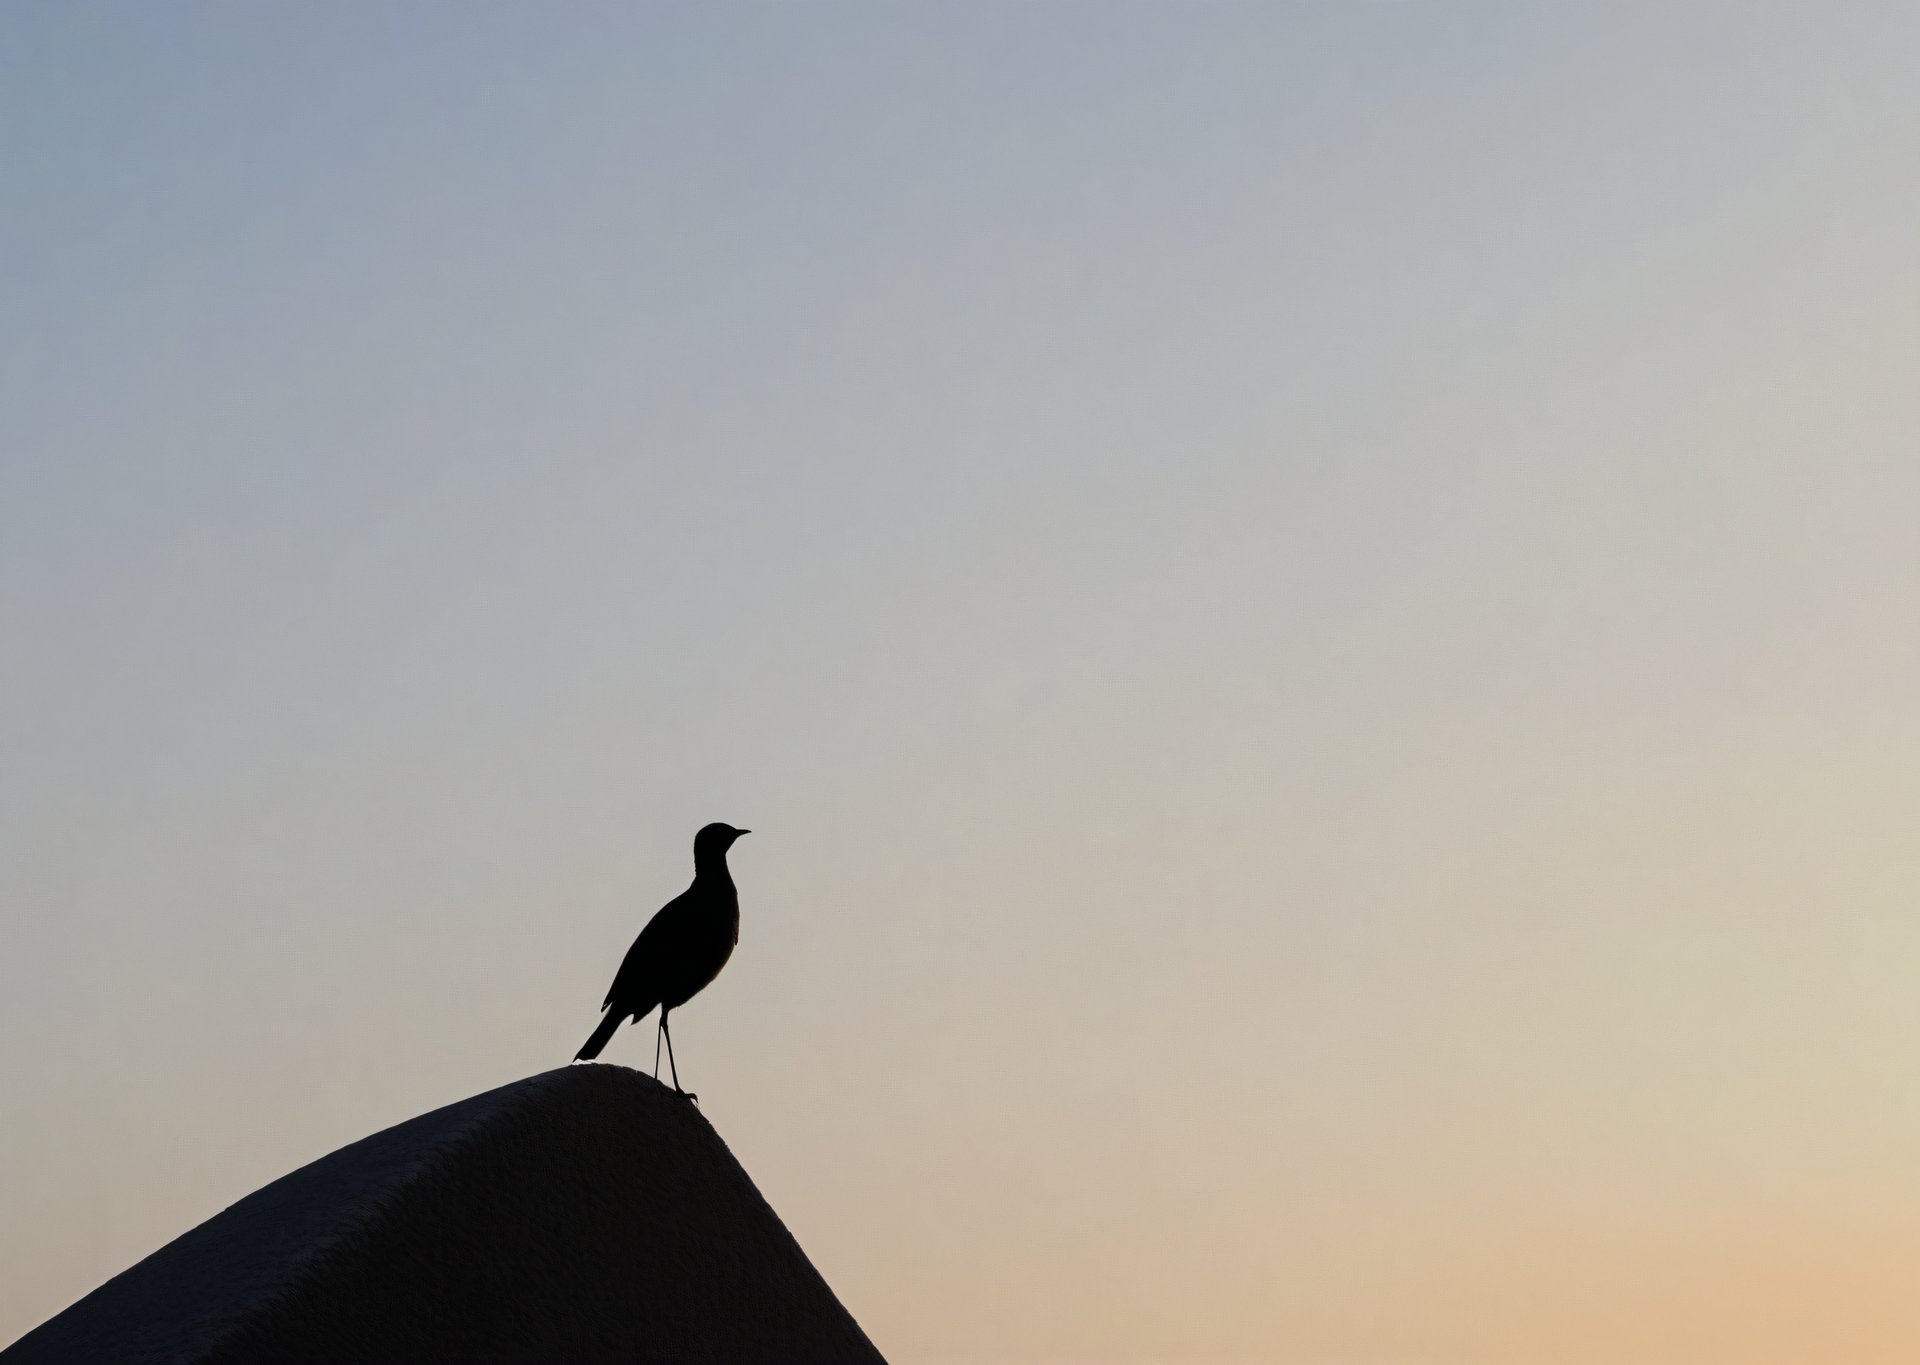 The Silhouette of A Bird